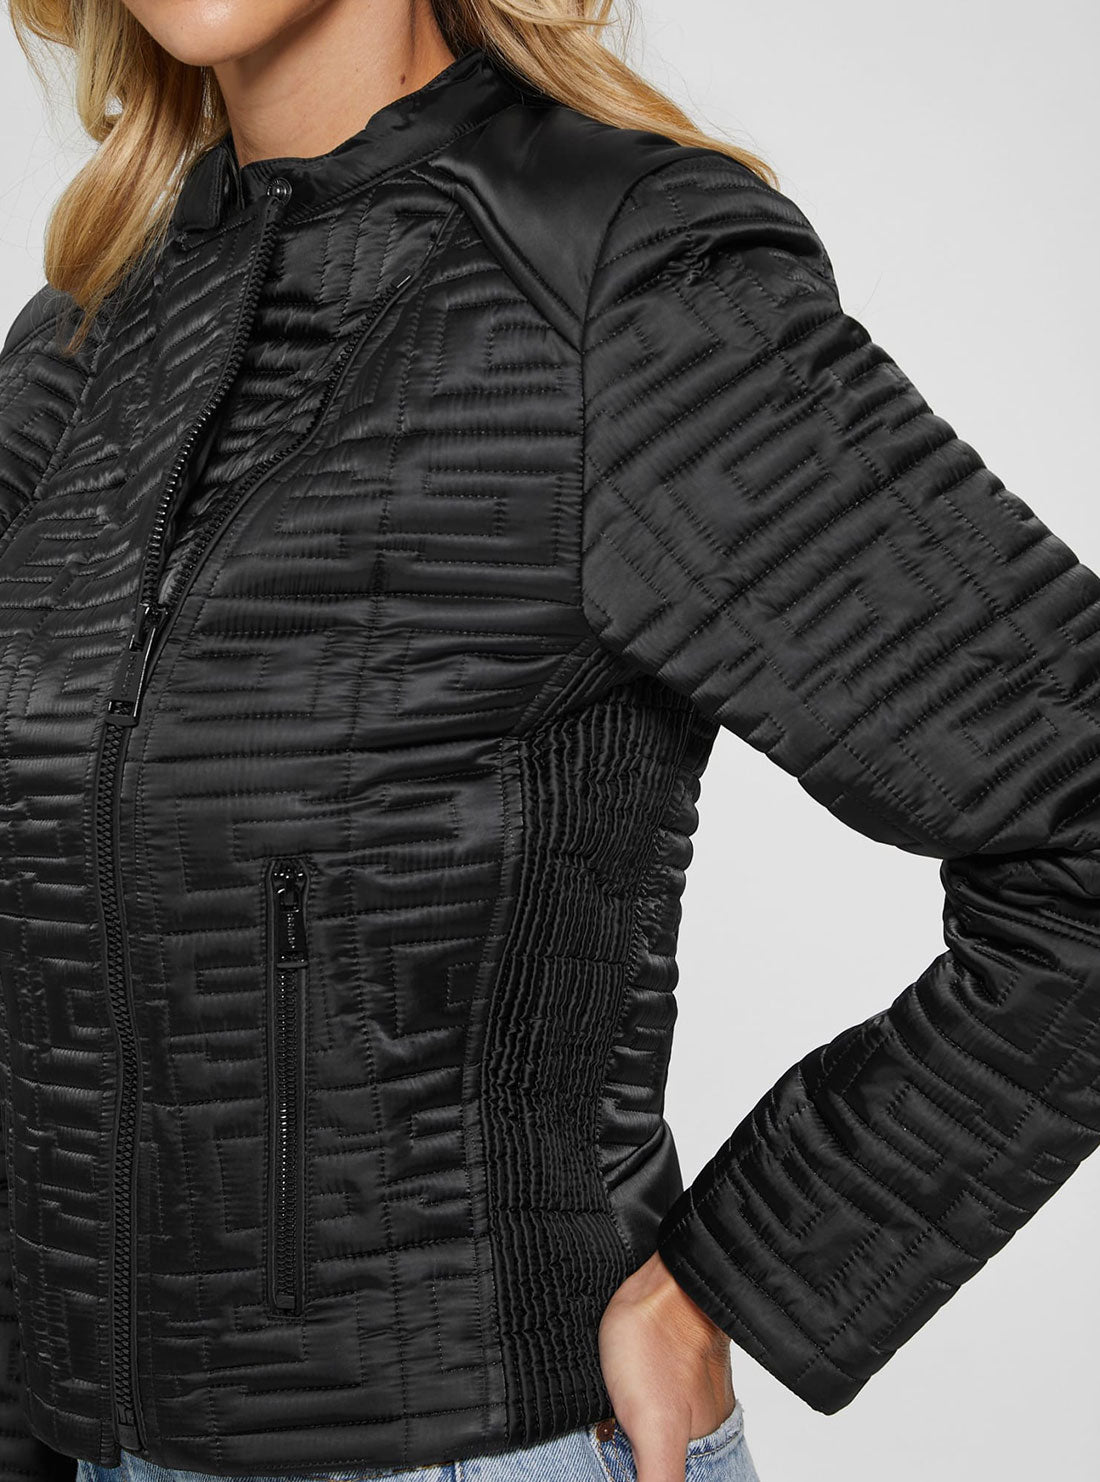 GUESS Women's Black Marine Quilted Jacekt W2BL31WEWF0 Detail View